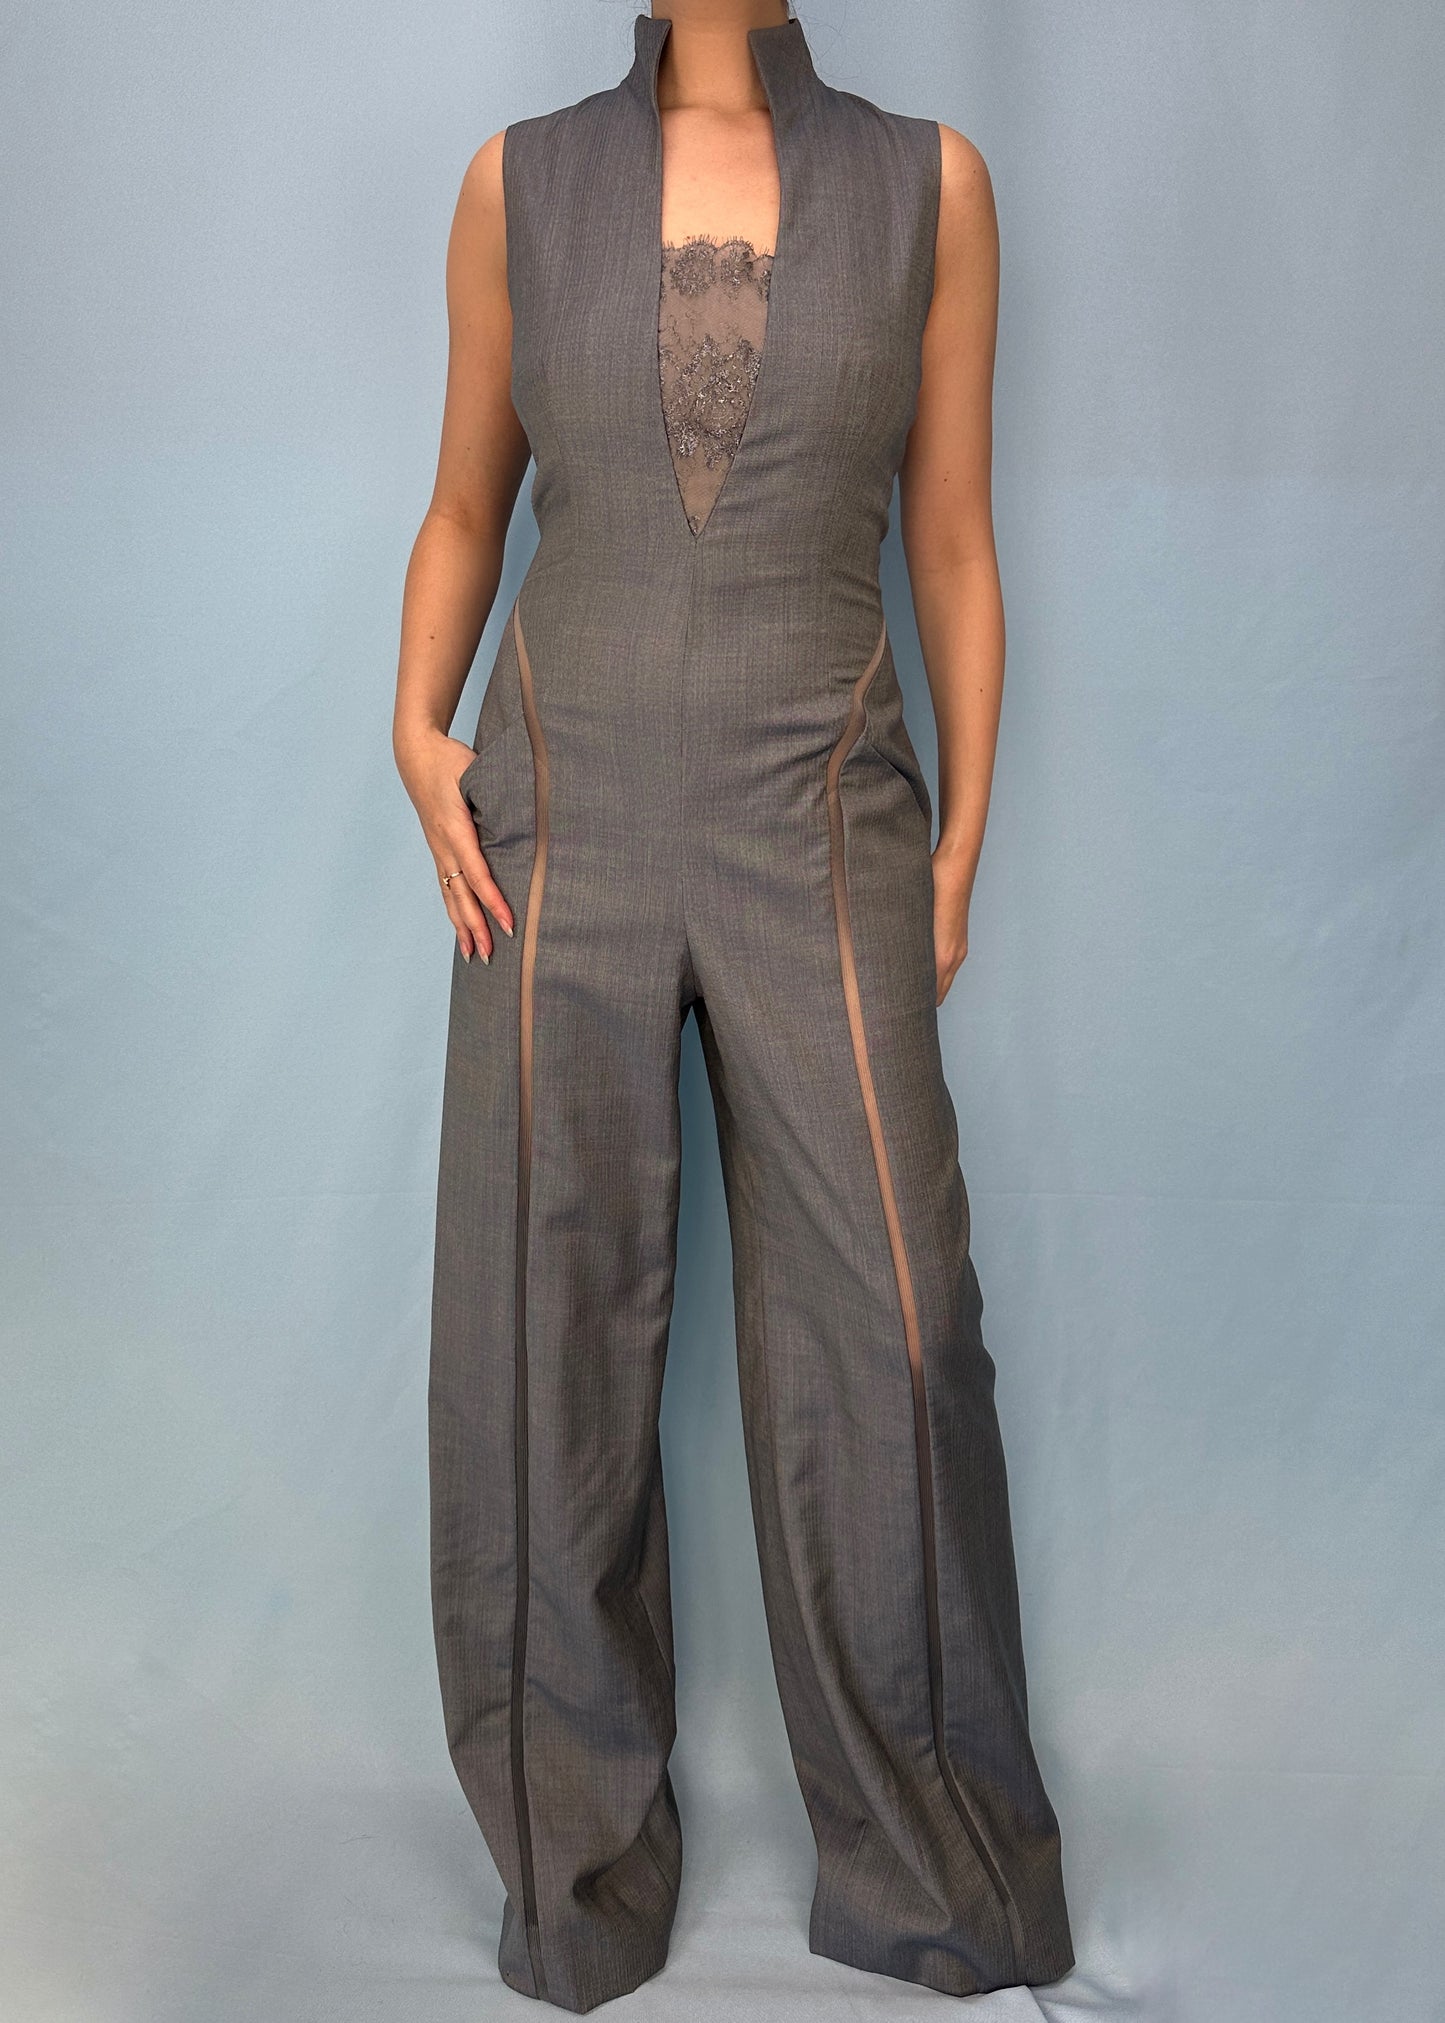 Givenchy Haute Couture by Alexander McQueen Spring 2000 Grey Mesh & Lace Detail Jumpsuit